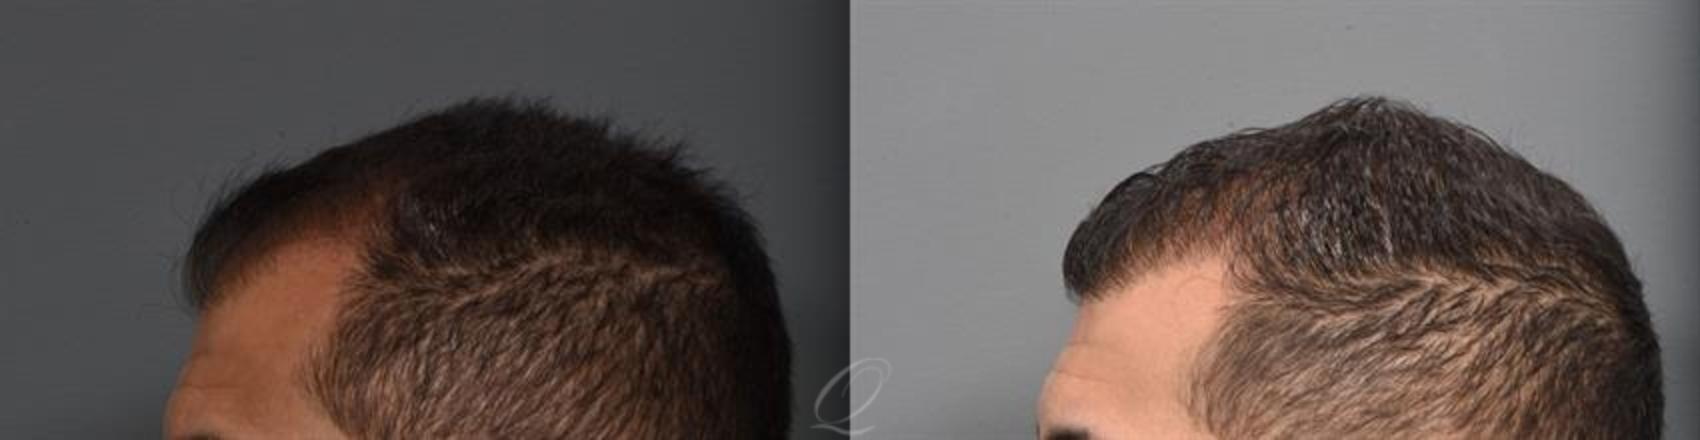 Male Fue Hair Transplant Before After Photos Patient Rochester